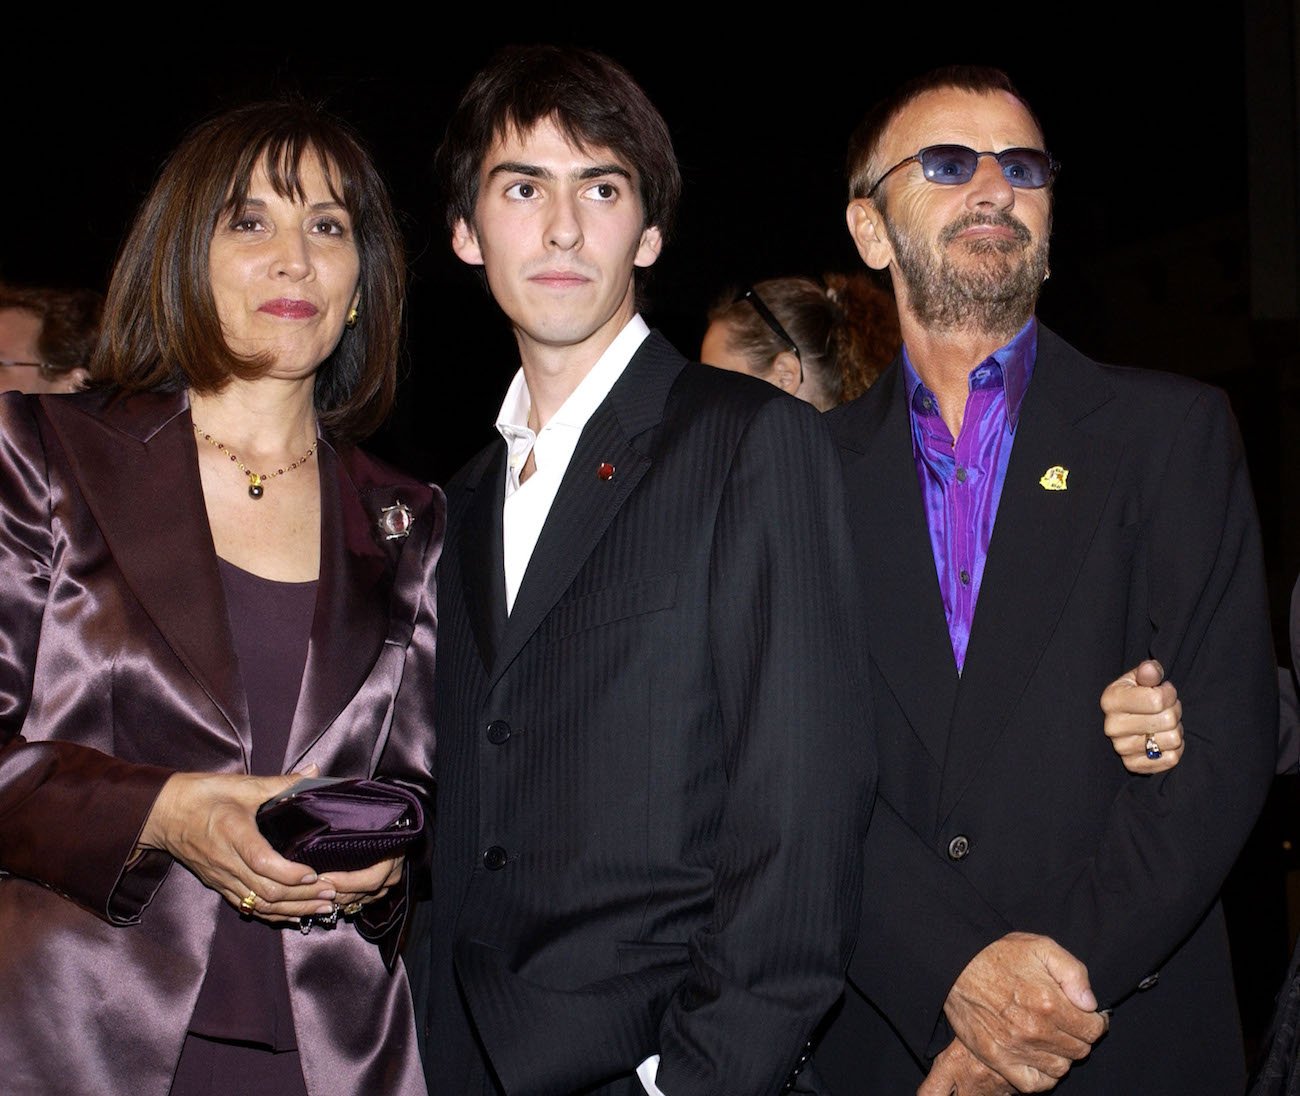 George Harrison's widow, Olivia, their son, Dhani, and Ringo Starr at the premiere of 'Concert for George.'